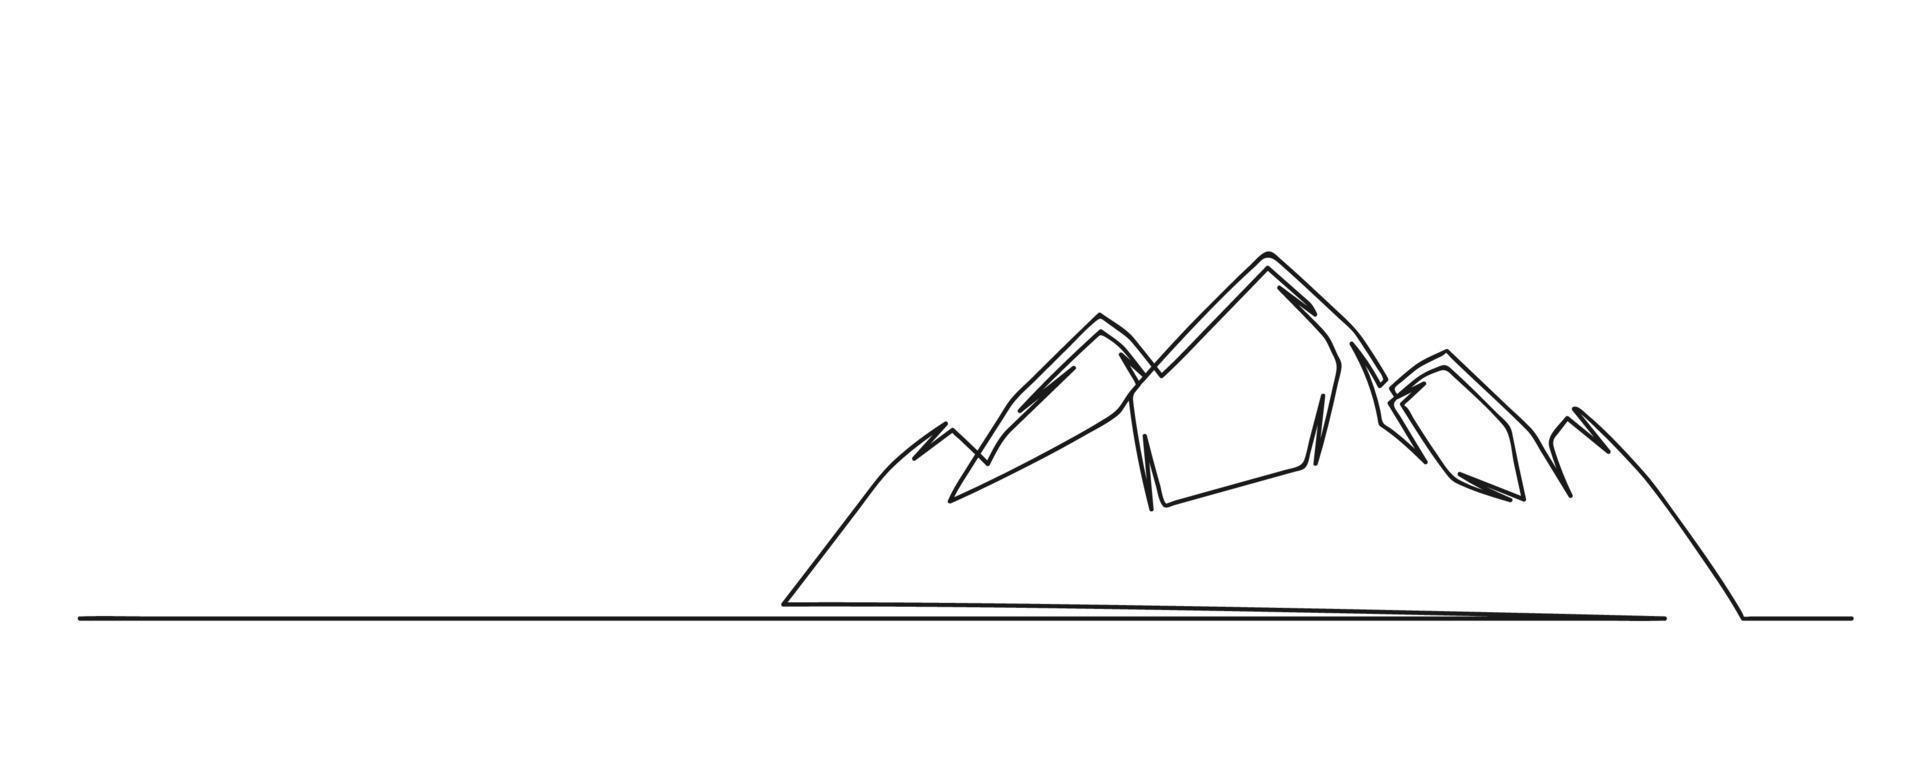 Continuous one line drawing of mountain hills vector